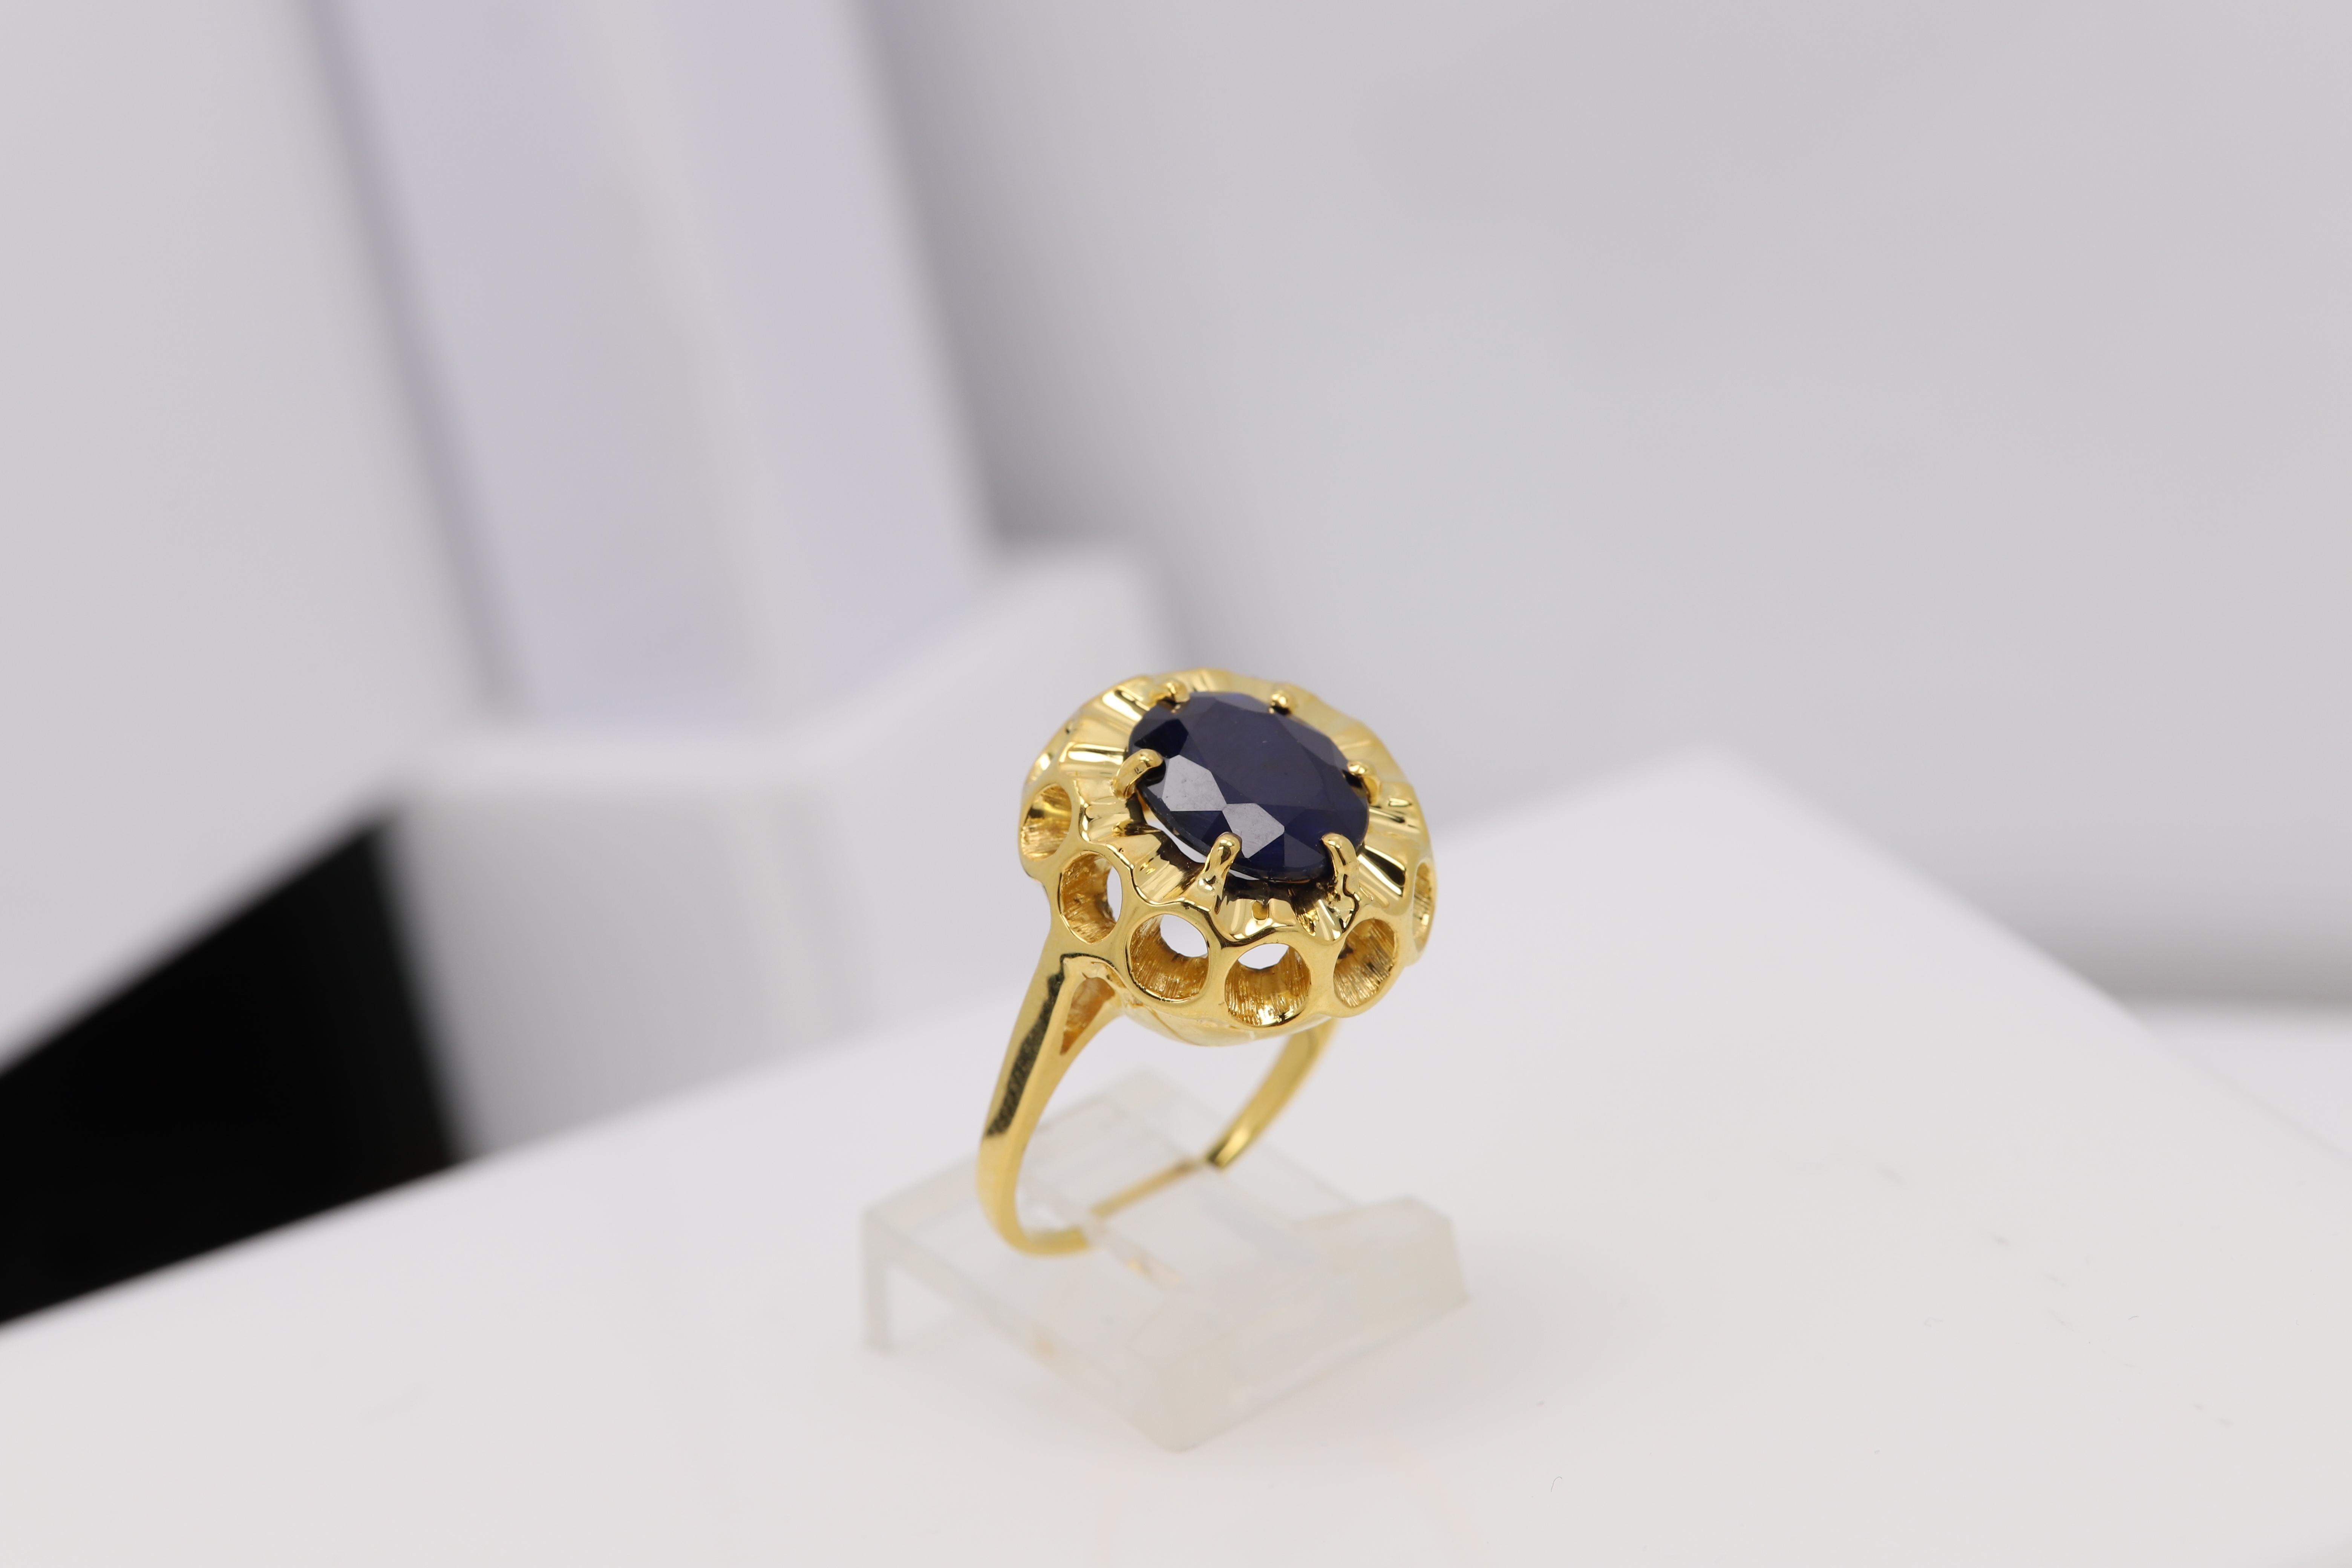 Vintage Large Oval Sapphire Ring 14 Karat Yellow Gold Circa 1940's For Sale 4